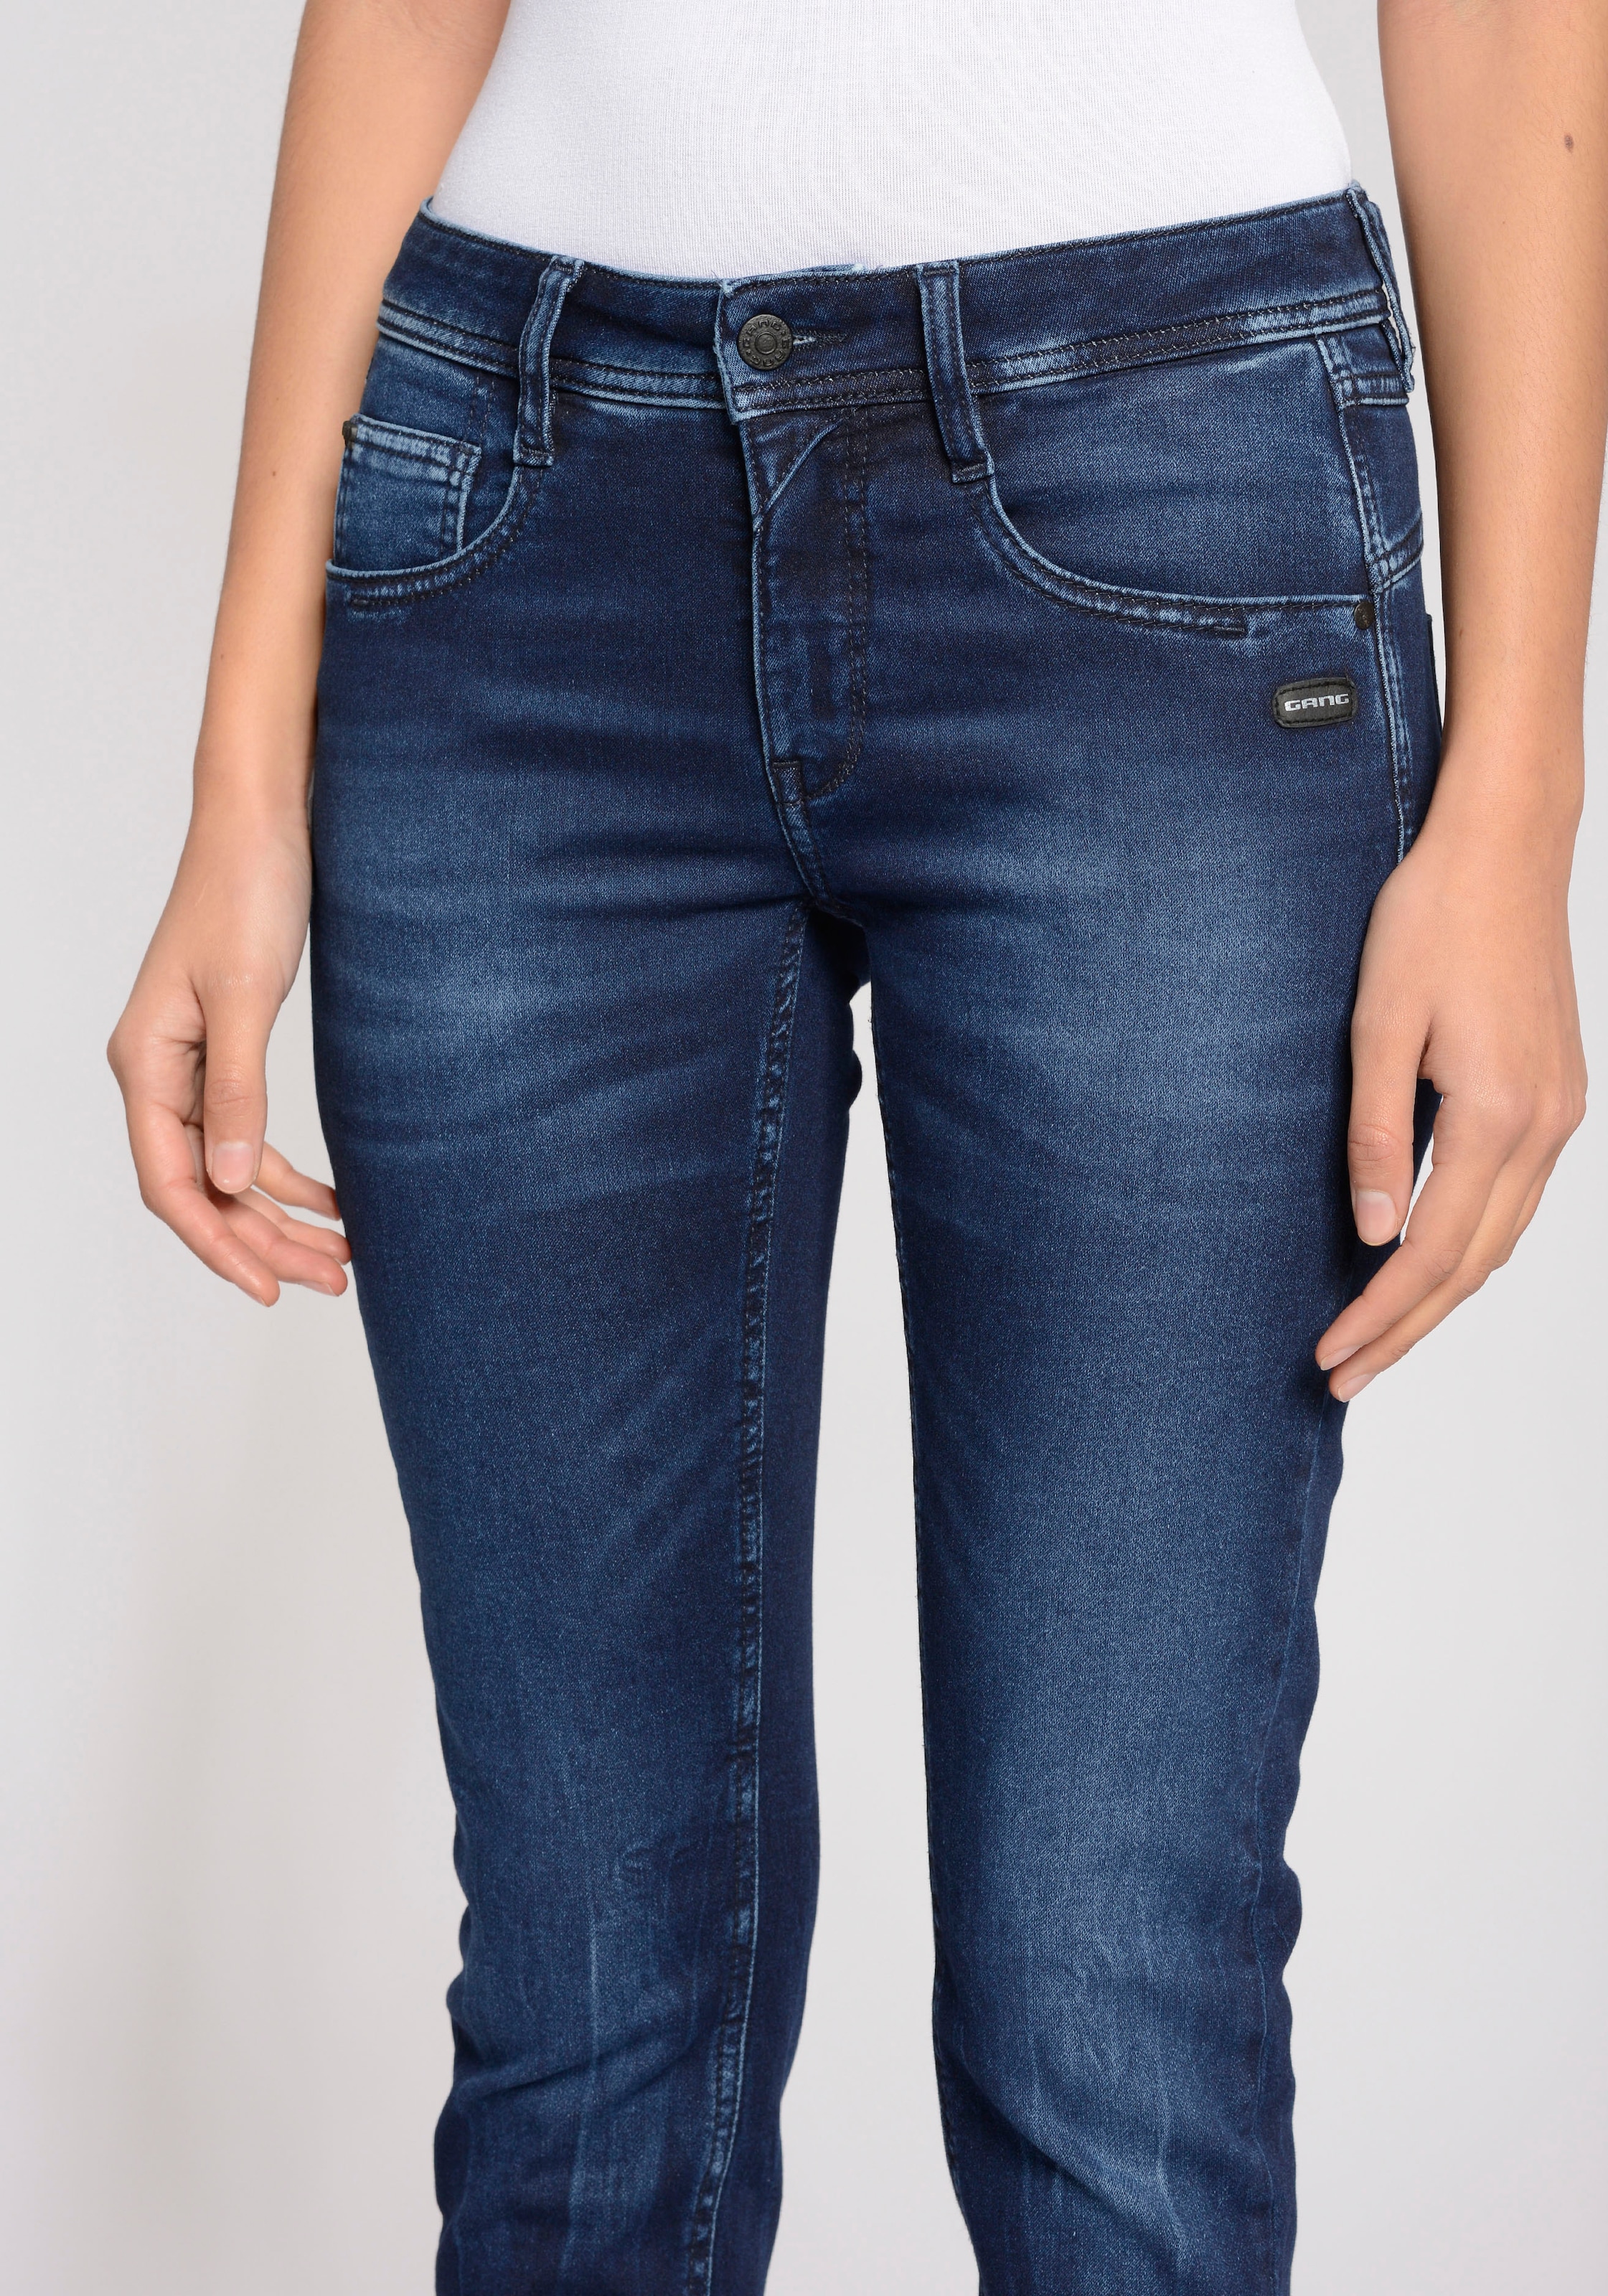 »94Amelie kaufen Relax-fit-Jeans Cropped« bei GANG OTTO